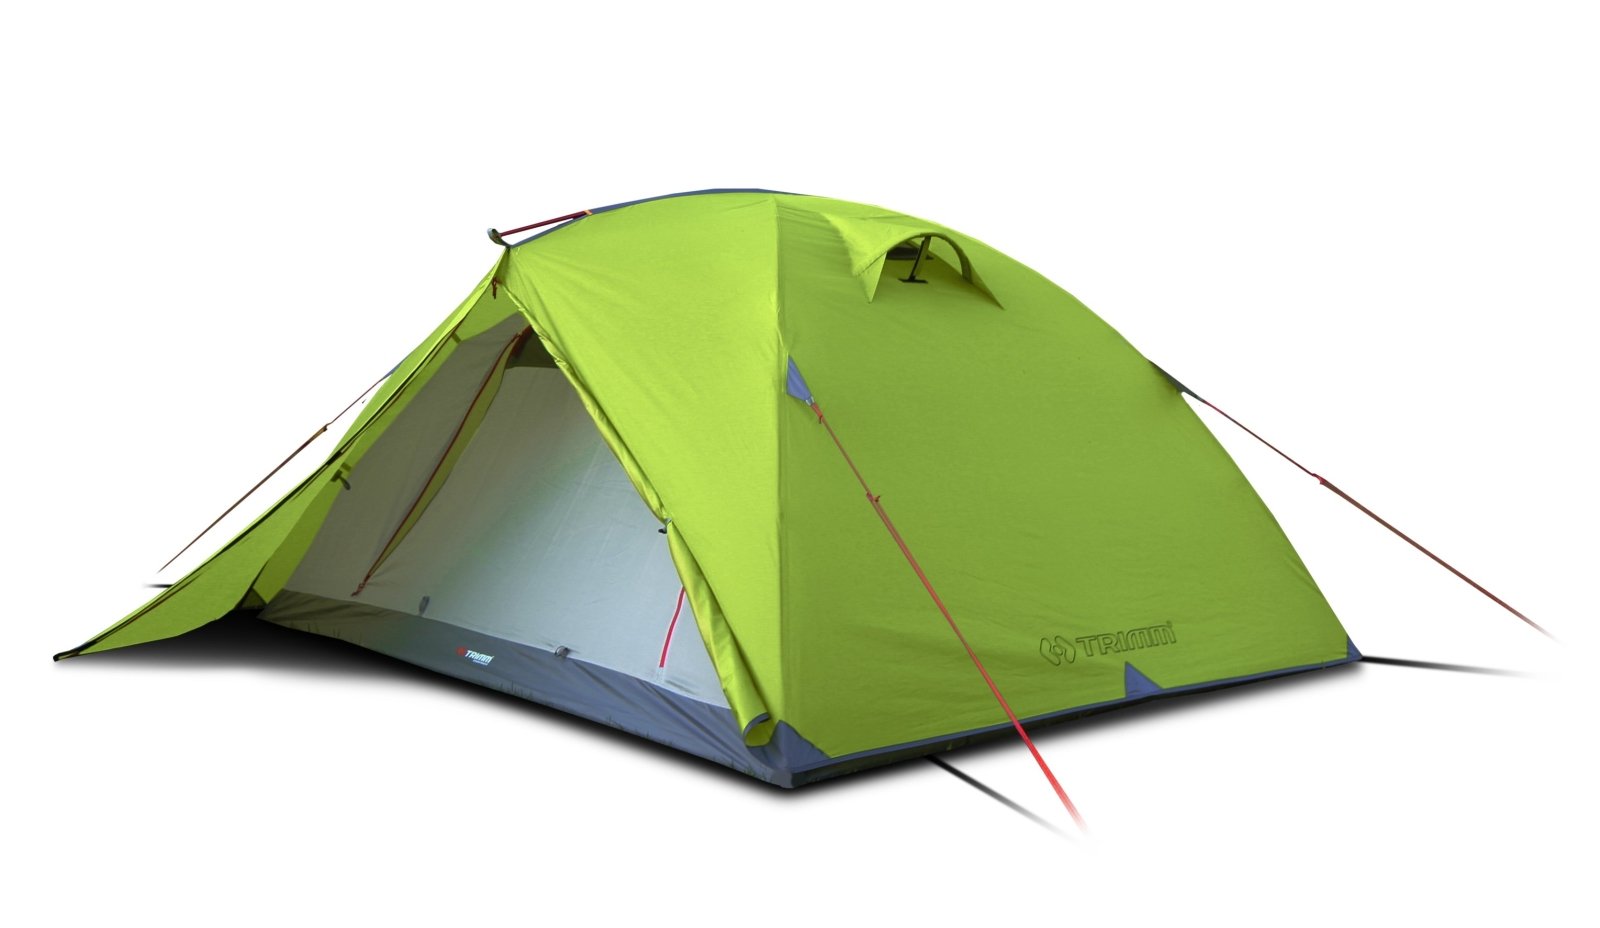 Trimm tent THUNDER D lime green/ grey